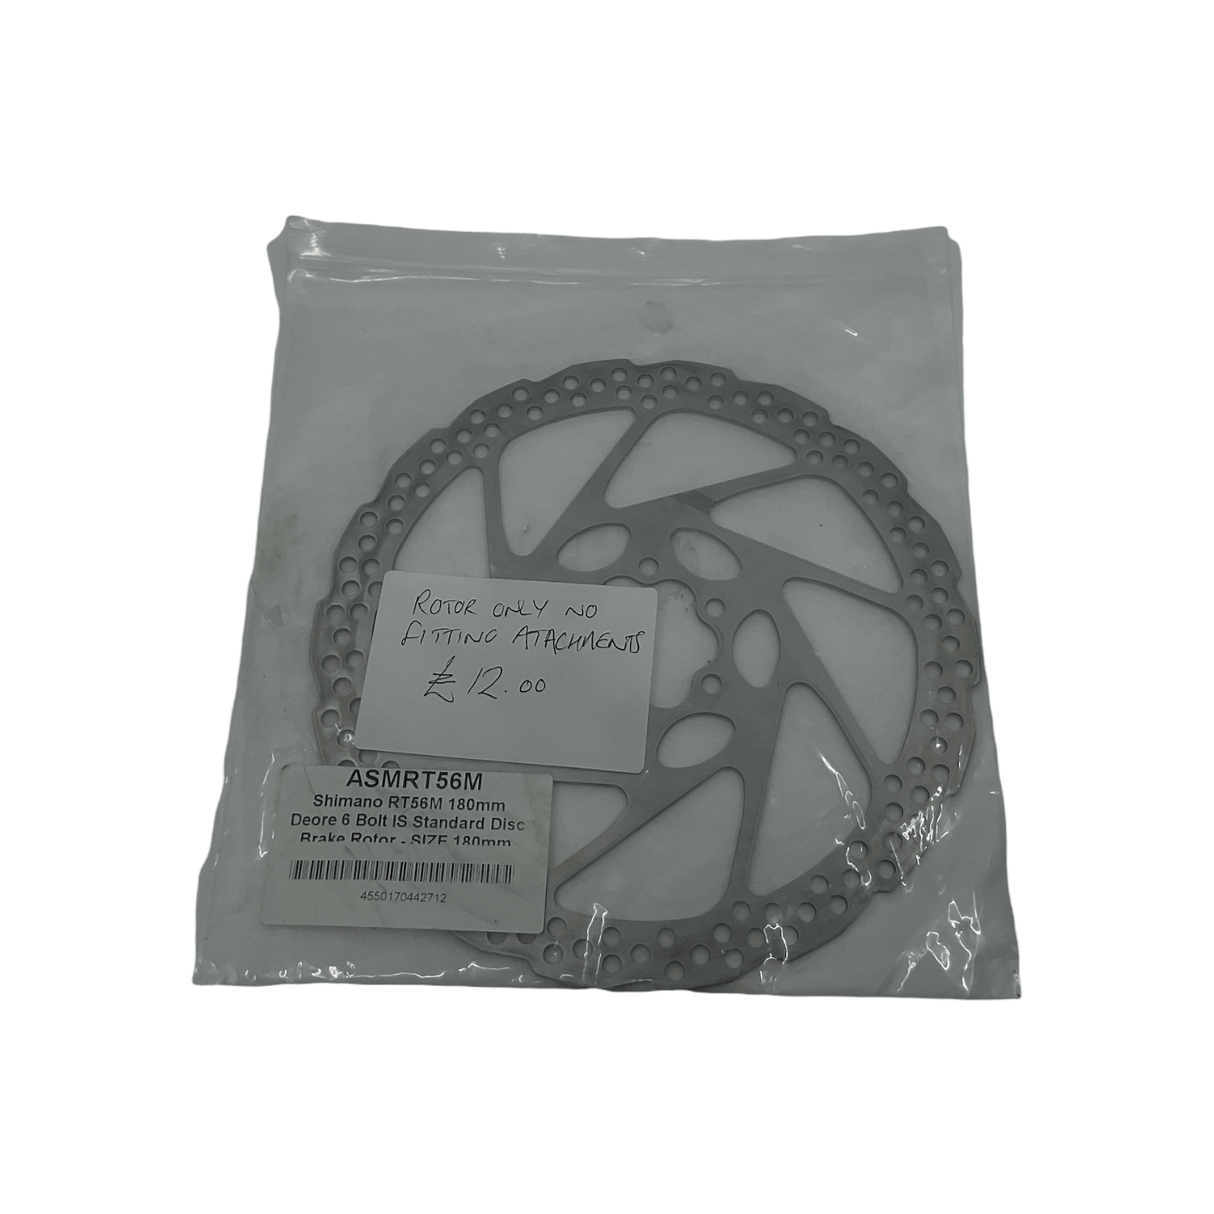 Shimano RT56M 180mm Deore 6 Bolt IS Standard Disc Brake Rotor (Shop Soiled)